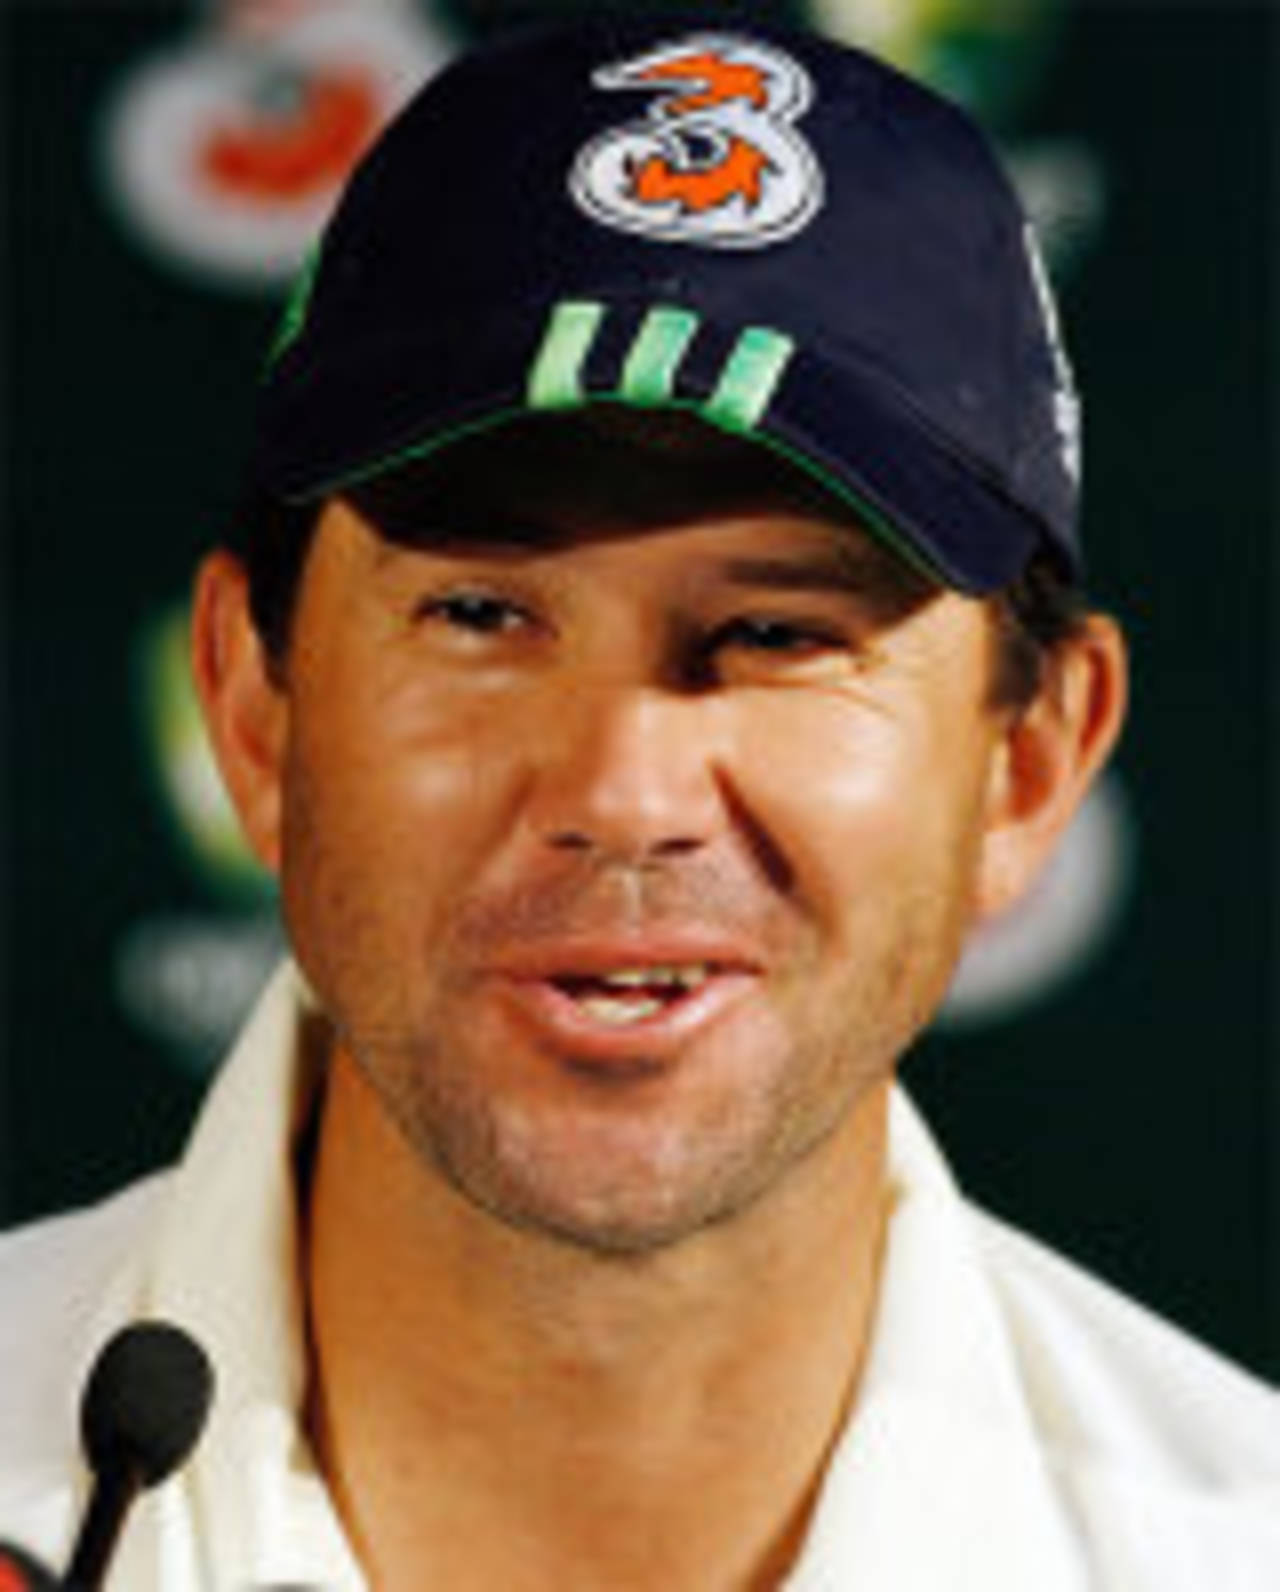 Ricky Ponting is all smiles as cricket is back on the agenda, WACA, January 15, 2008